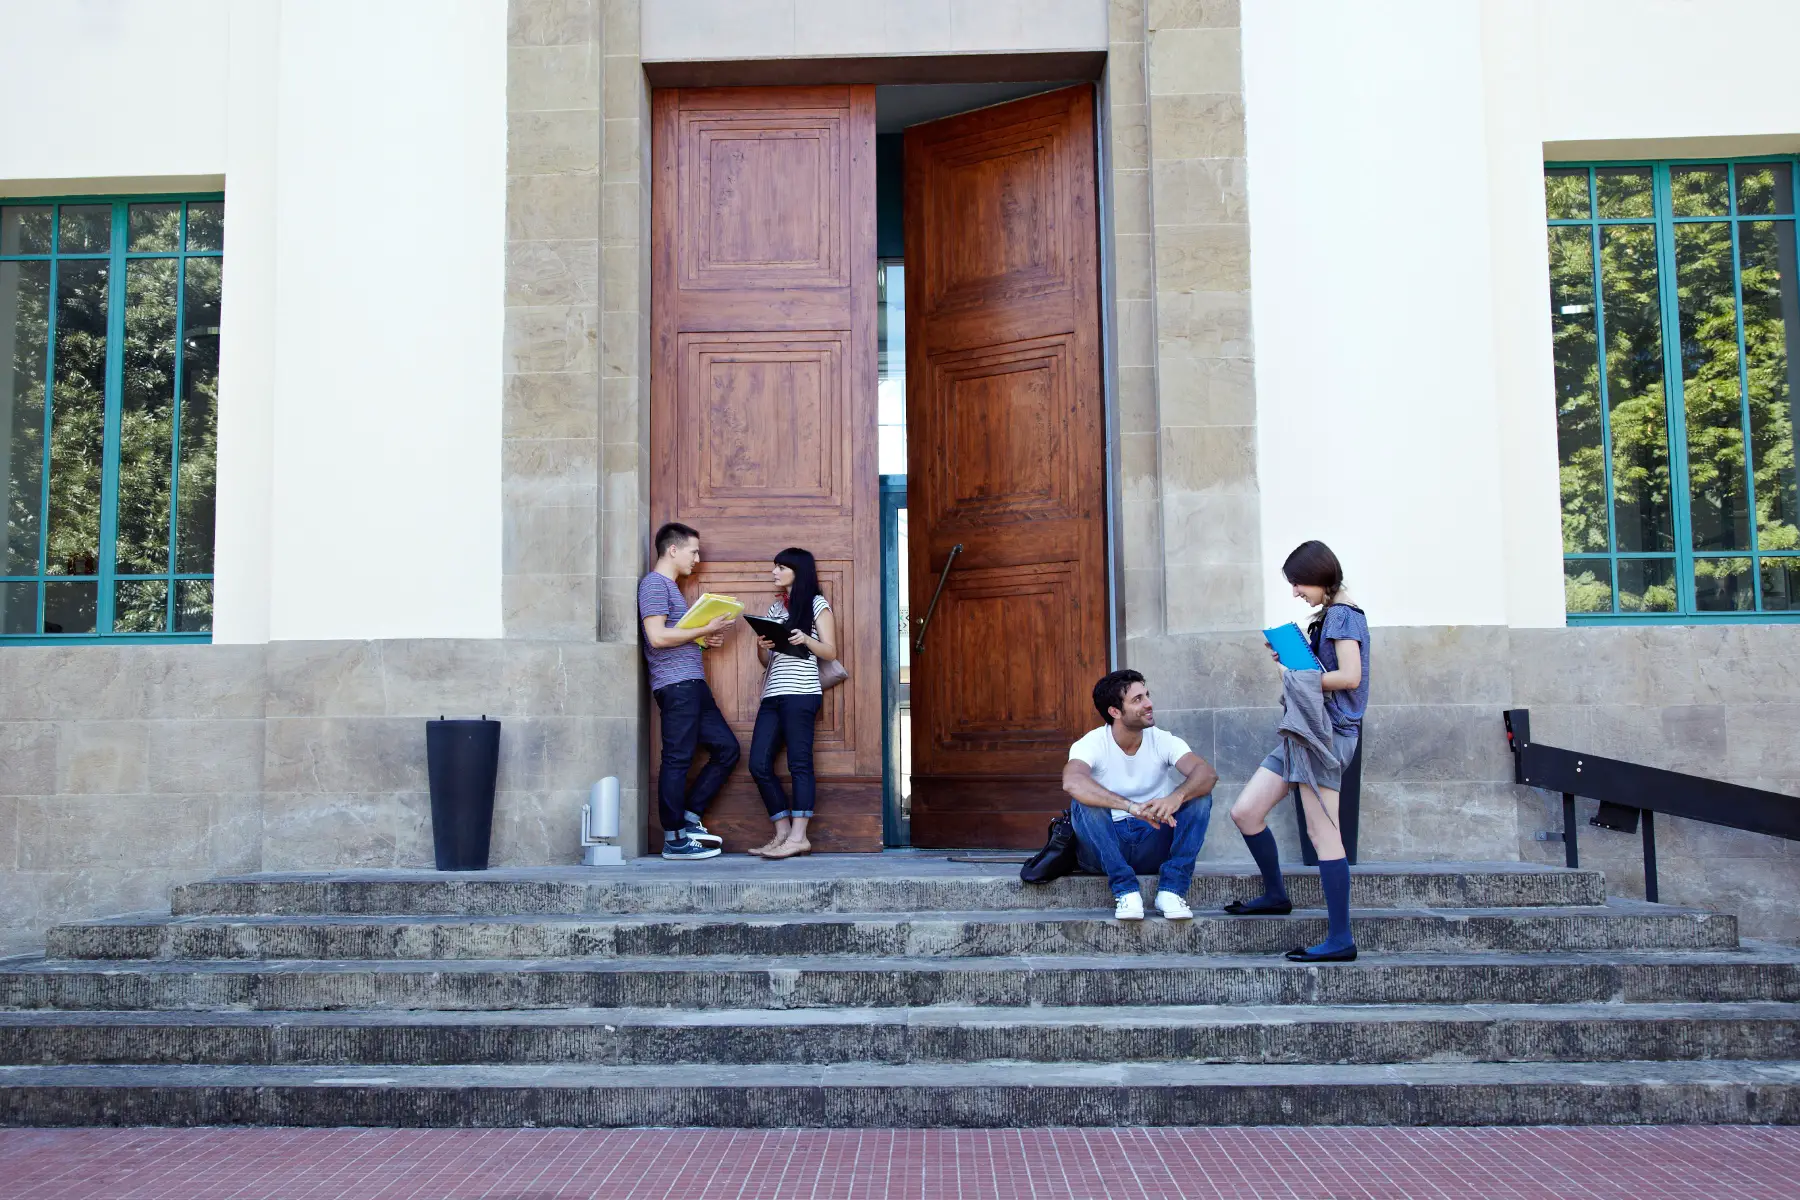 Students chatting on stone steps in front of large wooden doors - possibly at the university